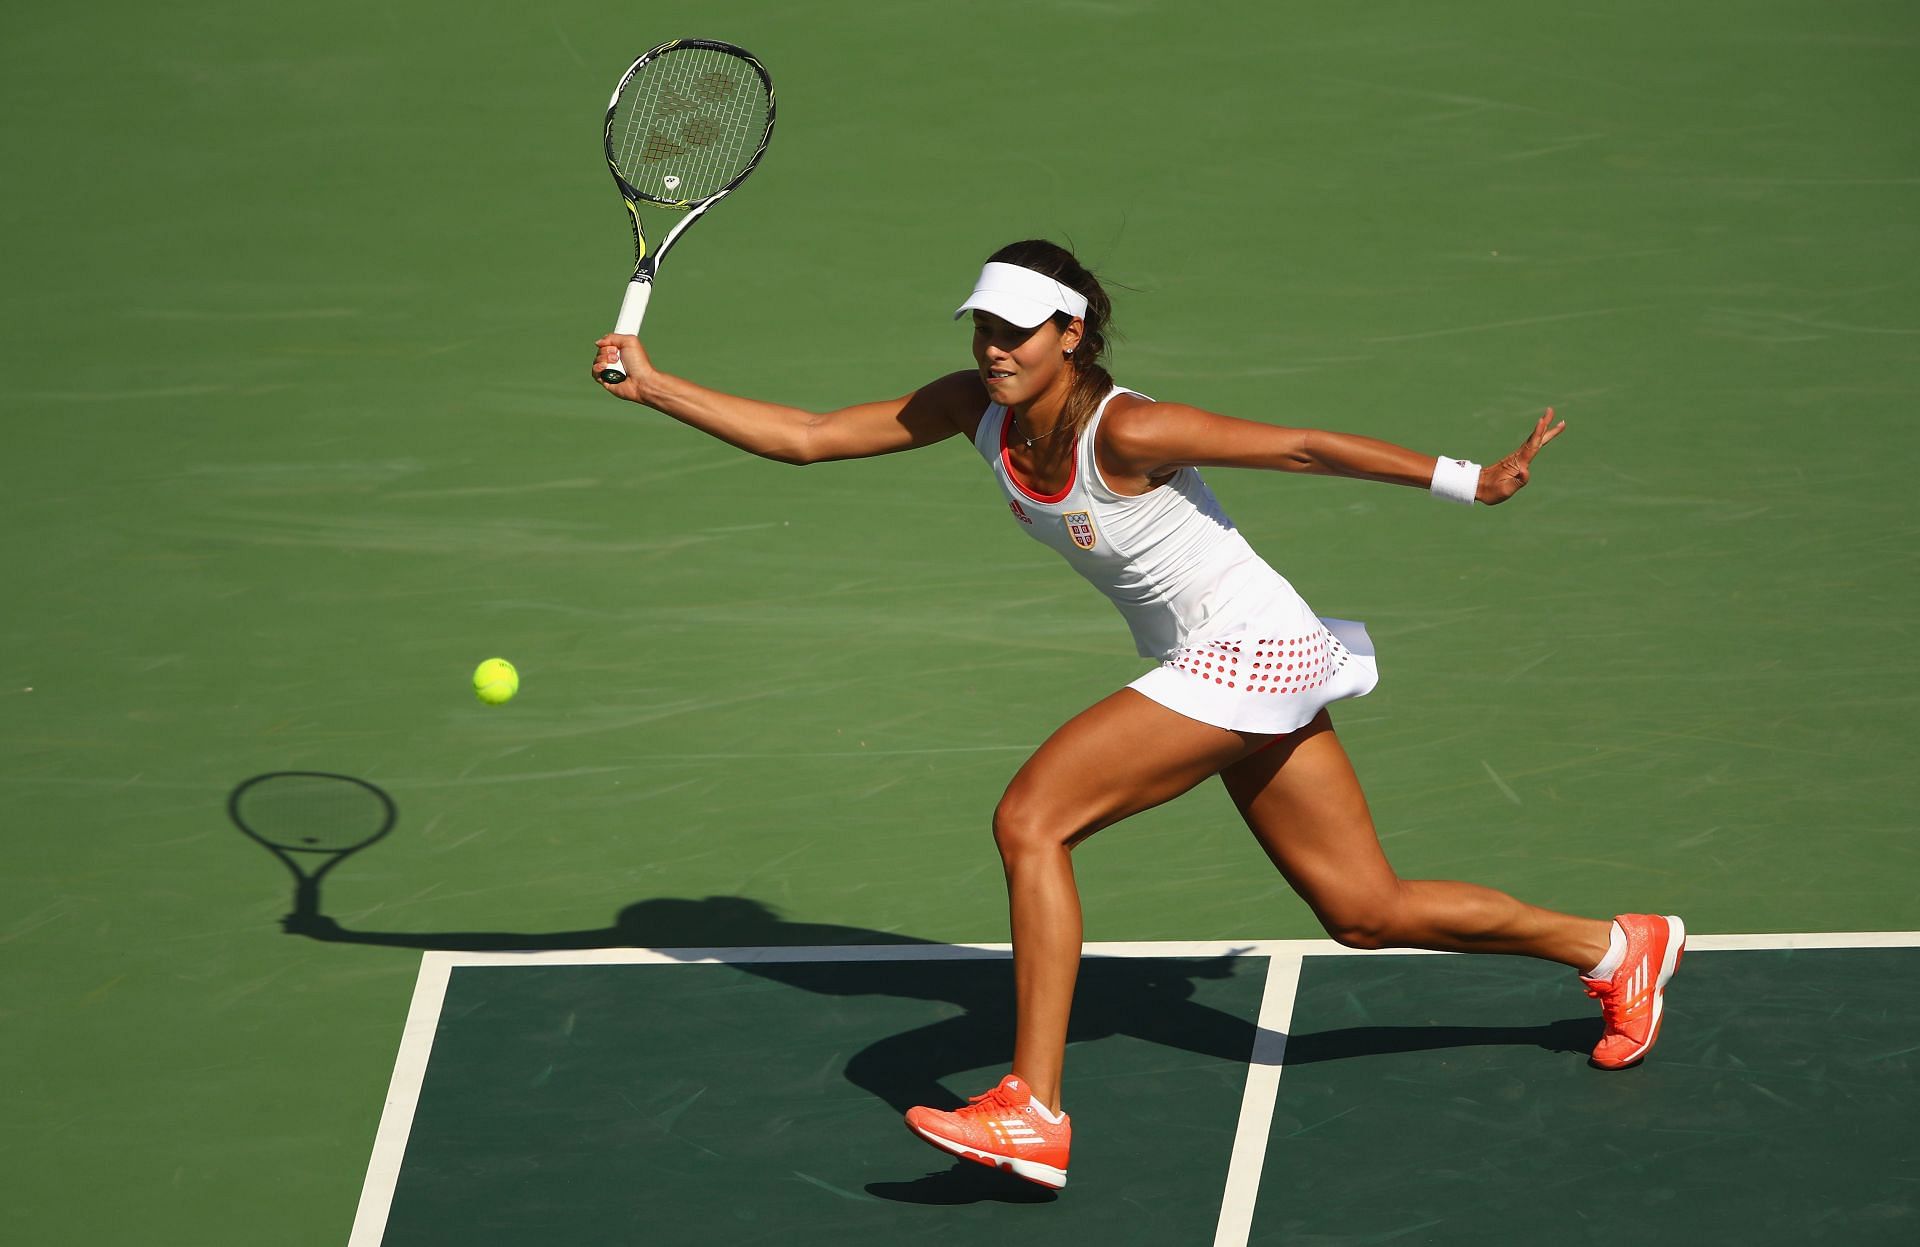 Ana Ivanovic in action during the Rio Olympics